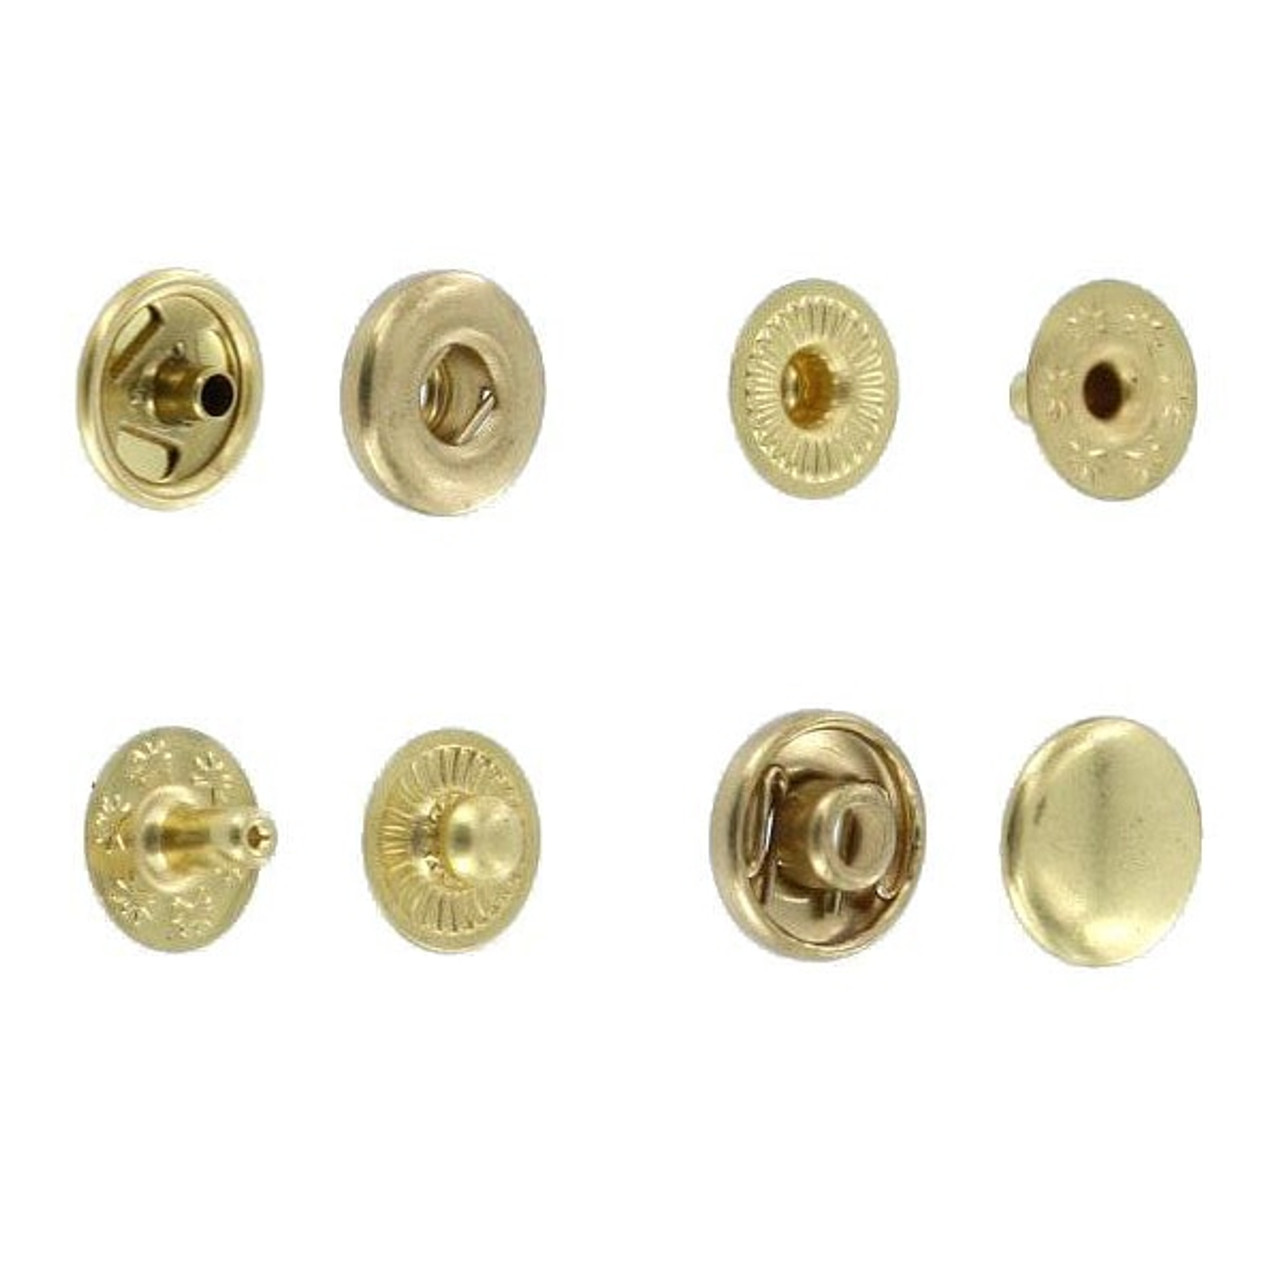 Snap Button(id:5139443) Product details - View Snap Button from